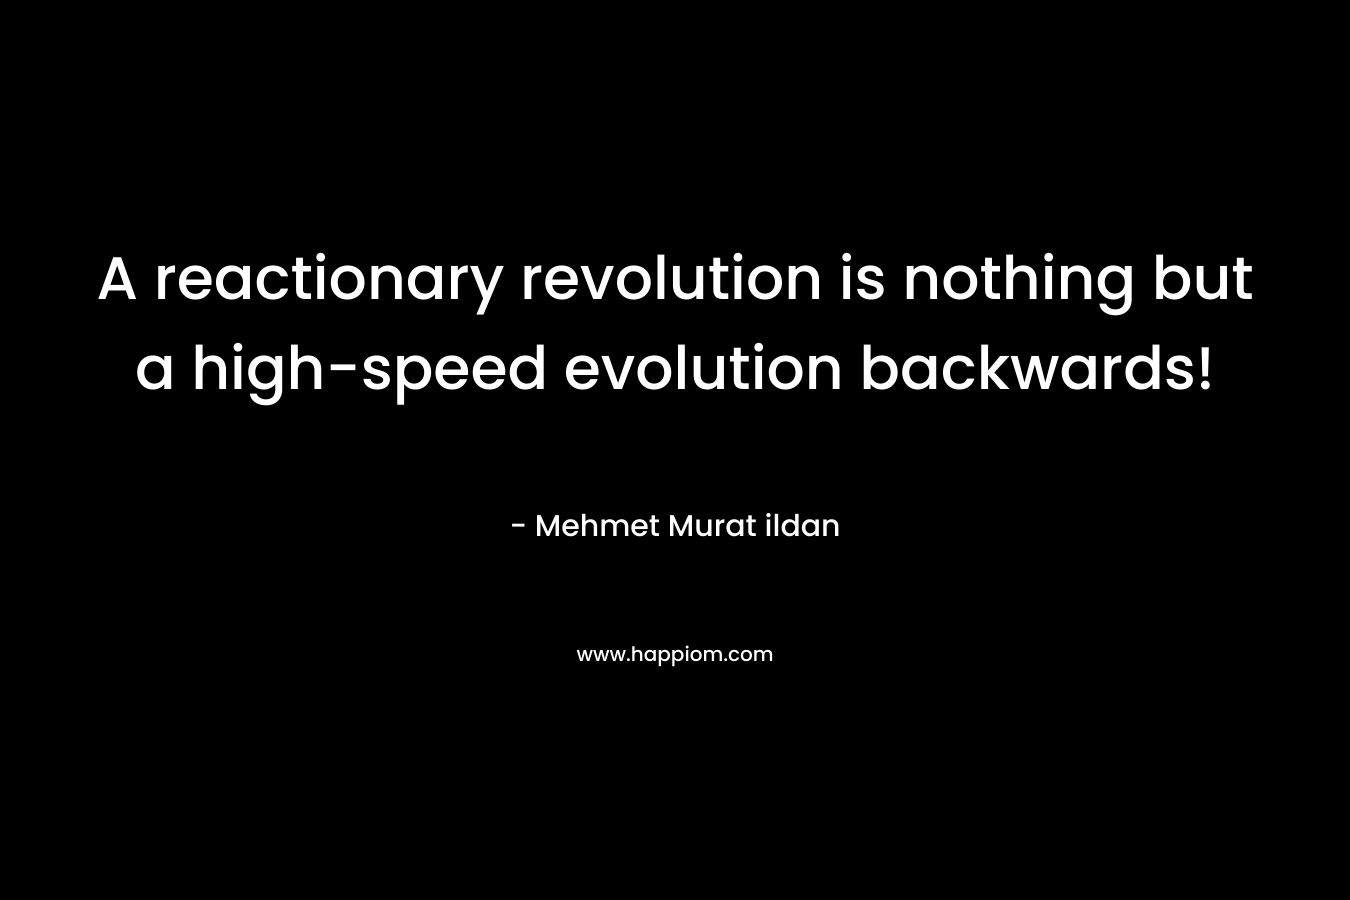 A reactionary revolution is nothing but a high-speed evolution backwards!